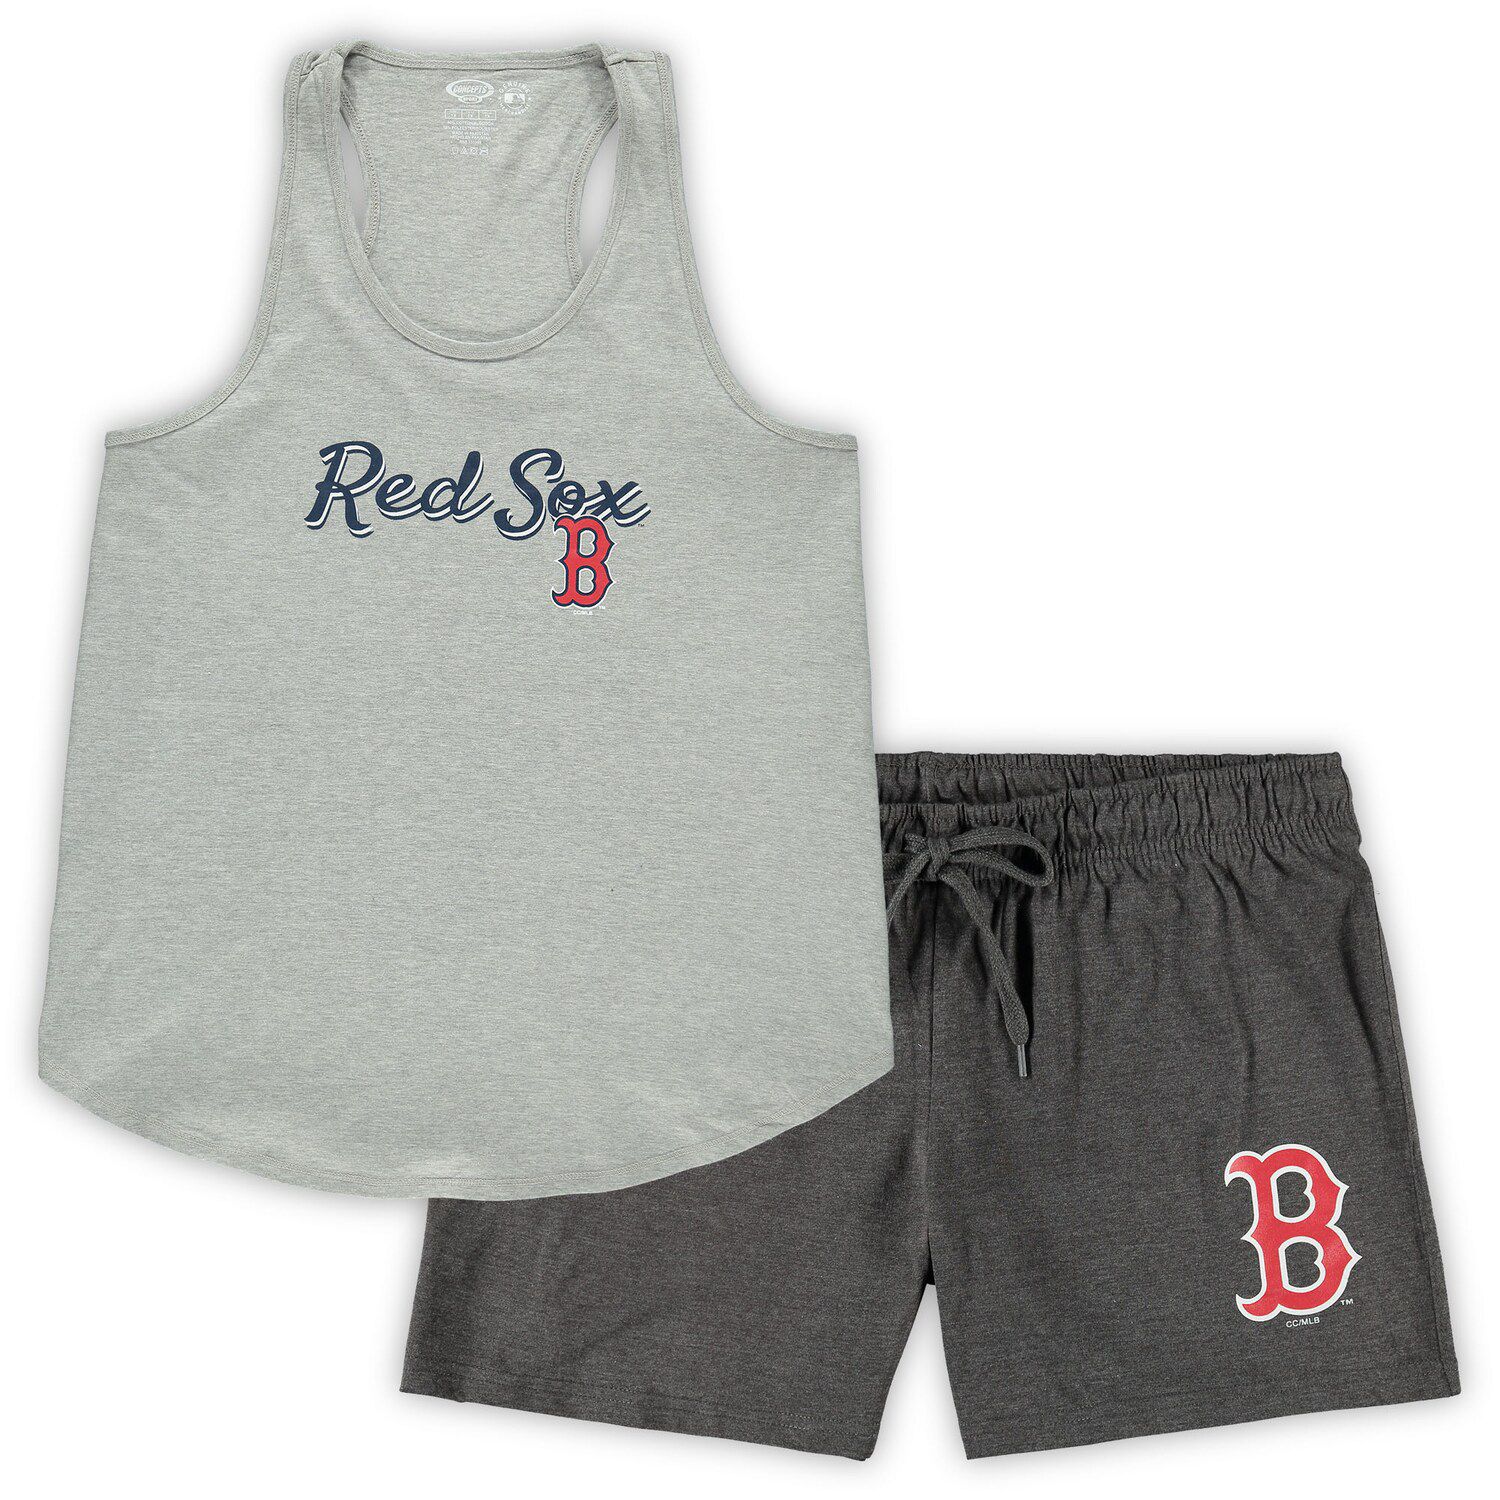 Image for Unbranded Women's Concepts Sport Heathered Gray/Heathered Charcoal Boston Red Sox Plus Size Tank Top & Shorts Sleep Set at Kohl's.